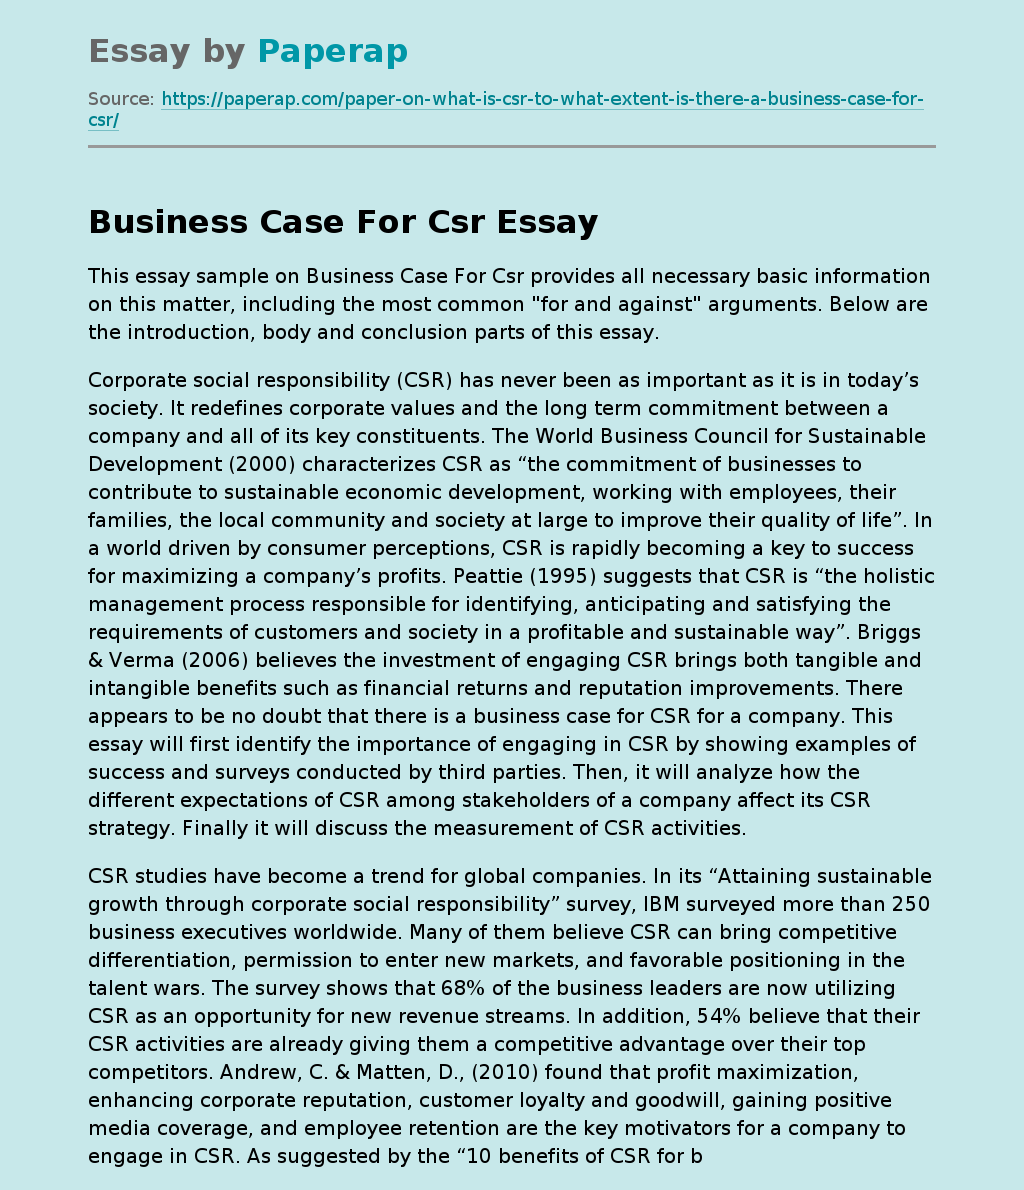 Business Case For Csr